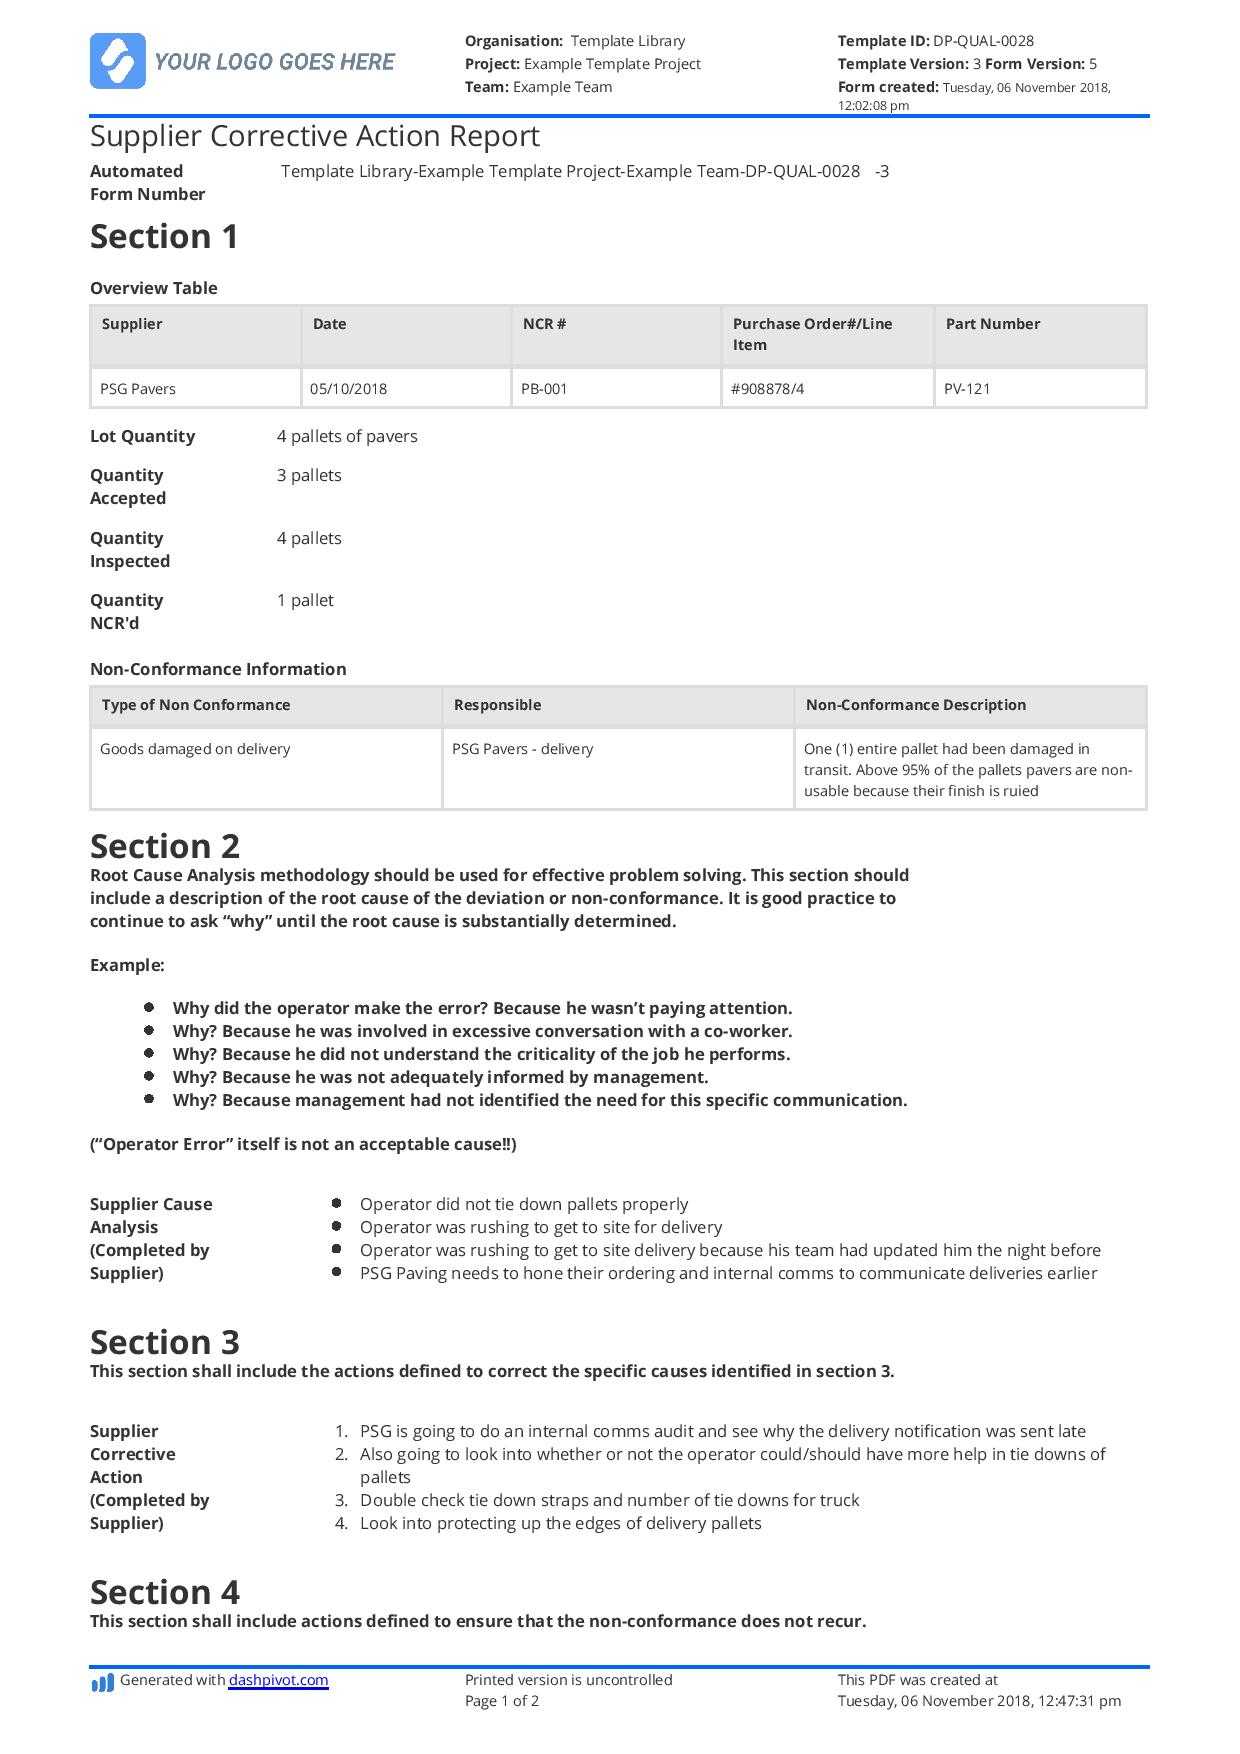 Supplier Corrective Action Report Template: Improve Your Regarding Corrective Action Report Template